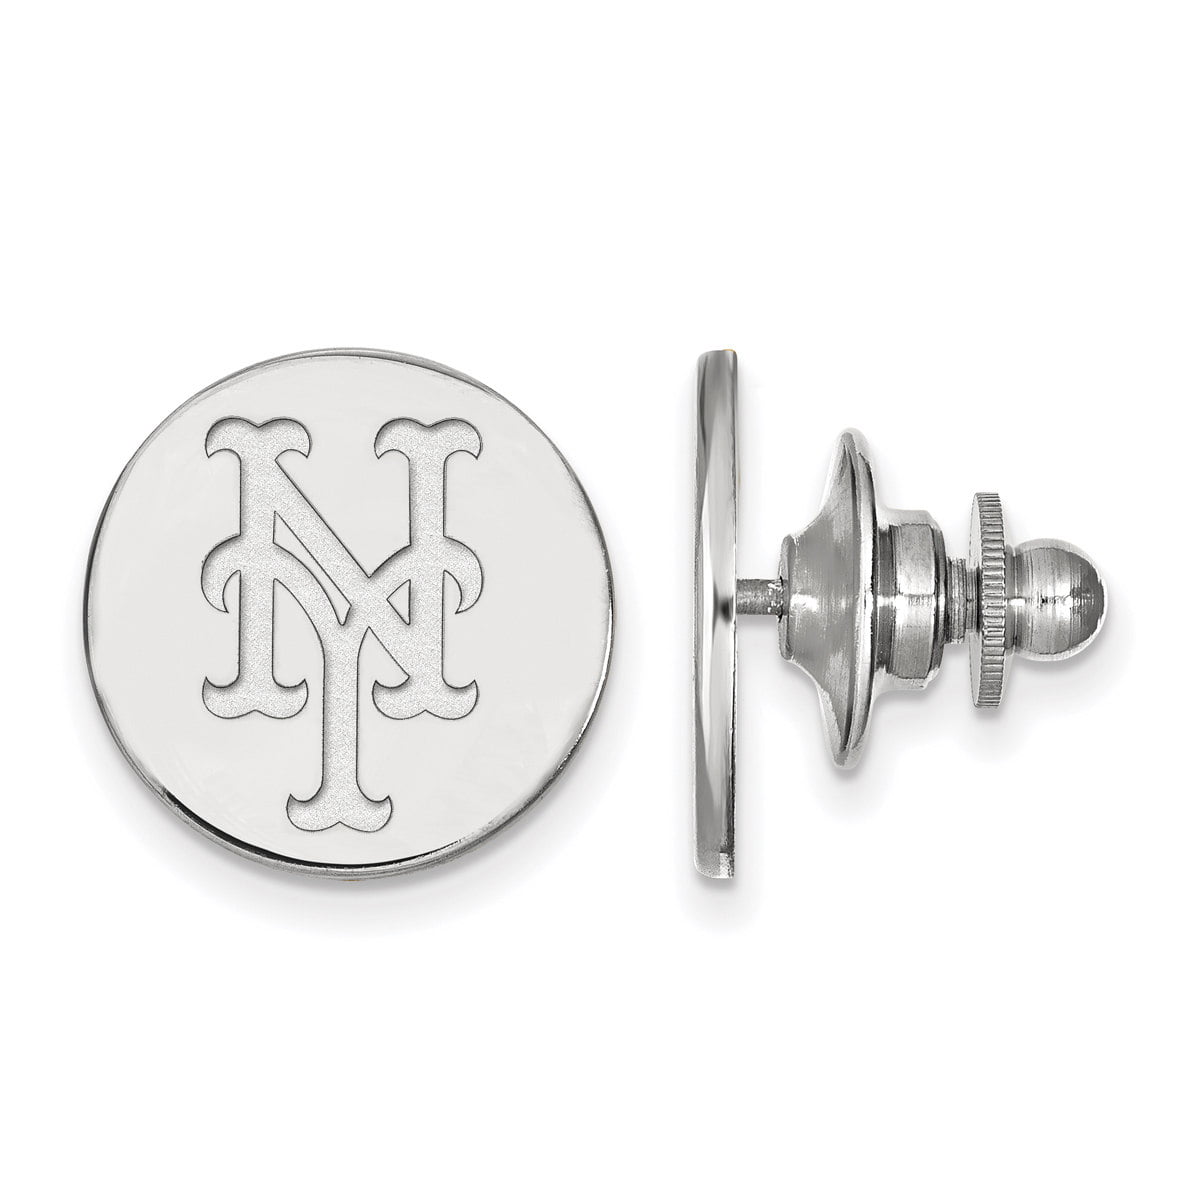 Pin on mets